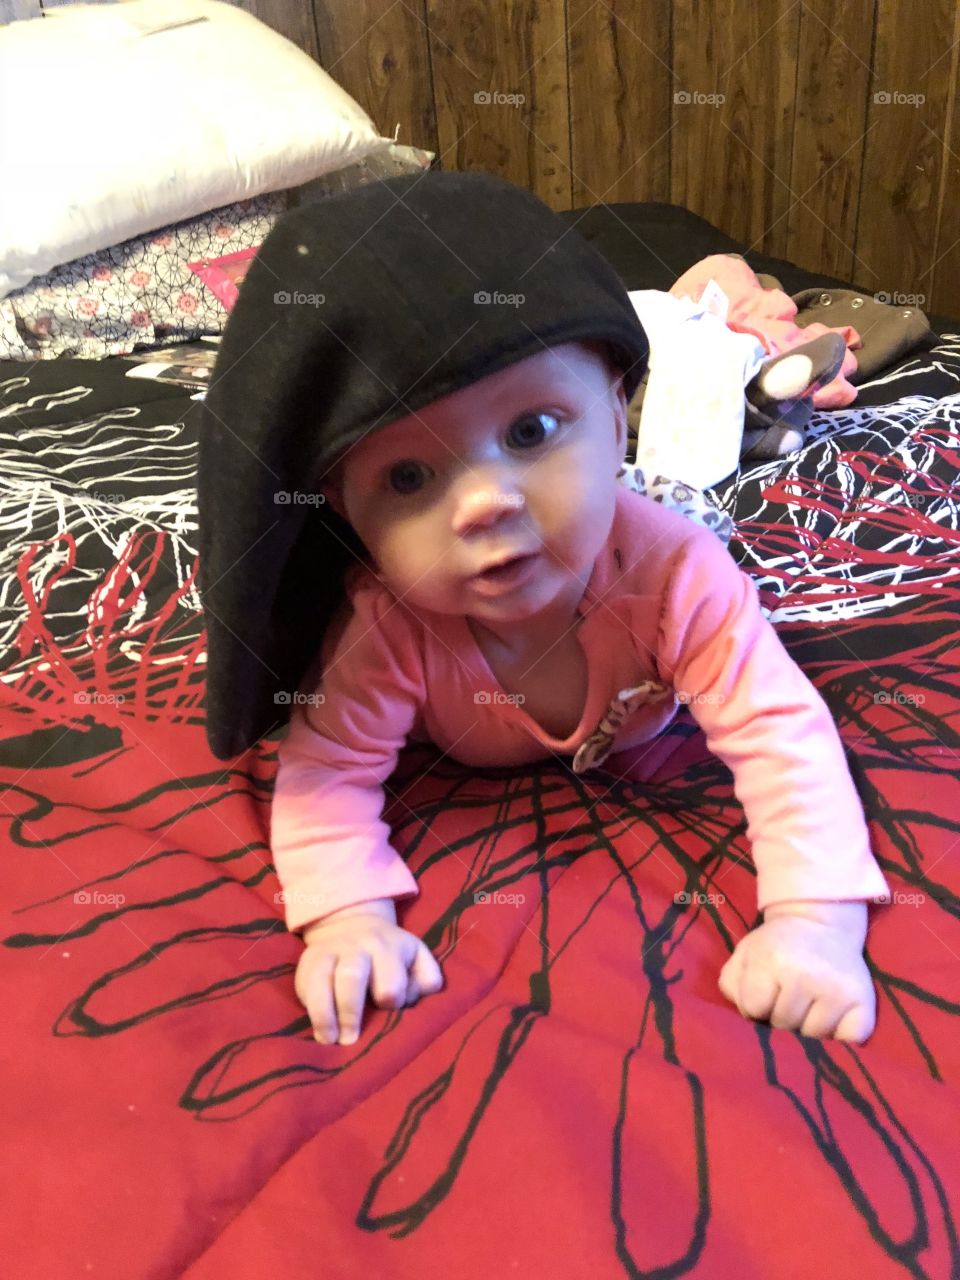 Wearing hats at 4 months